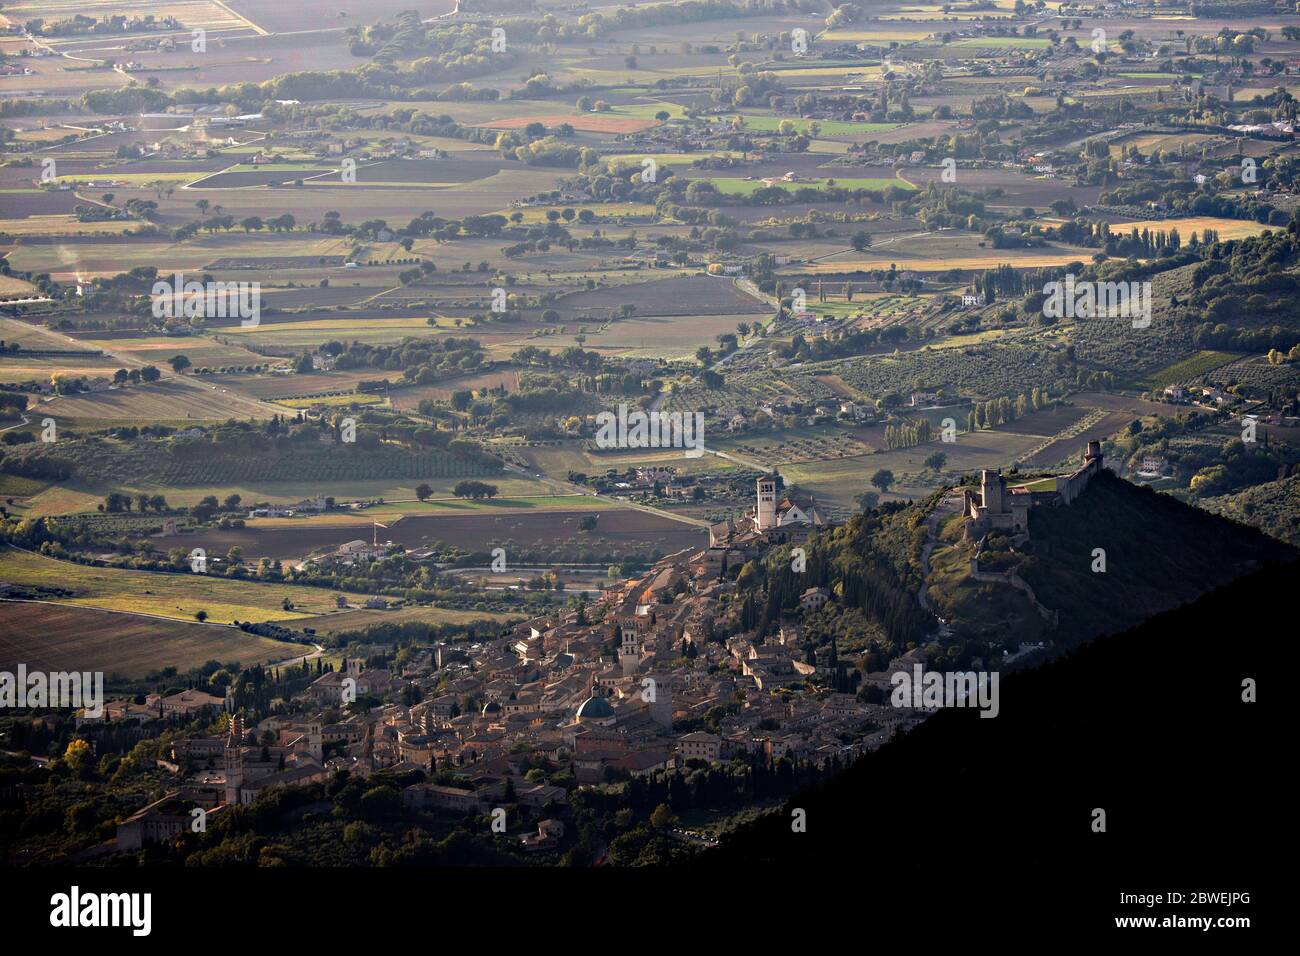 Assisi seen from above, framed by Mount Subasio, showing all the plain in front of it Stock Photo